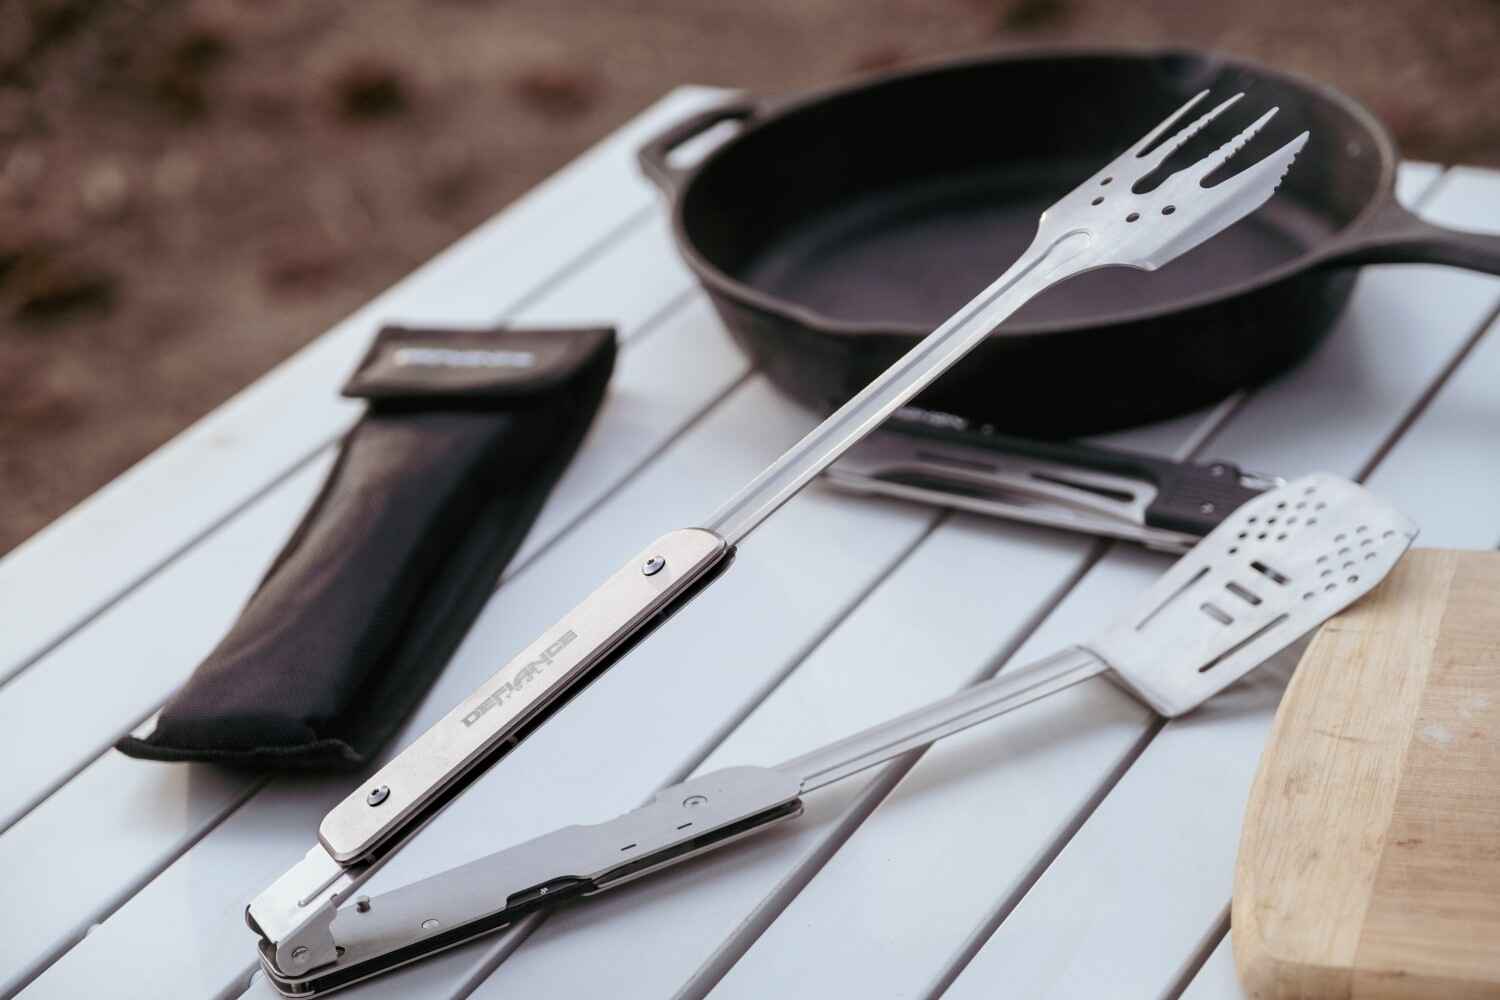 BBQ Grilling Tools - If You Want That Perfect Steak, This Is The Grill Set You Need - Long Heavy Duty Stainless Steel Barbecue Utensils - Cook Your